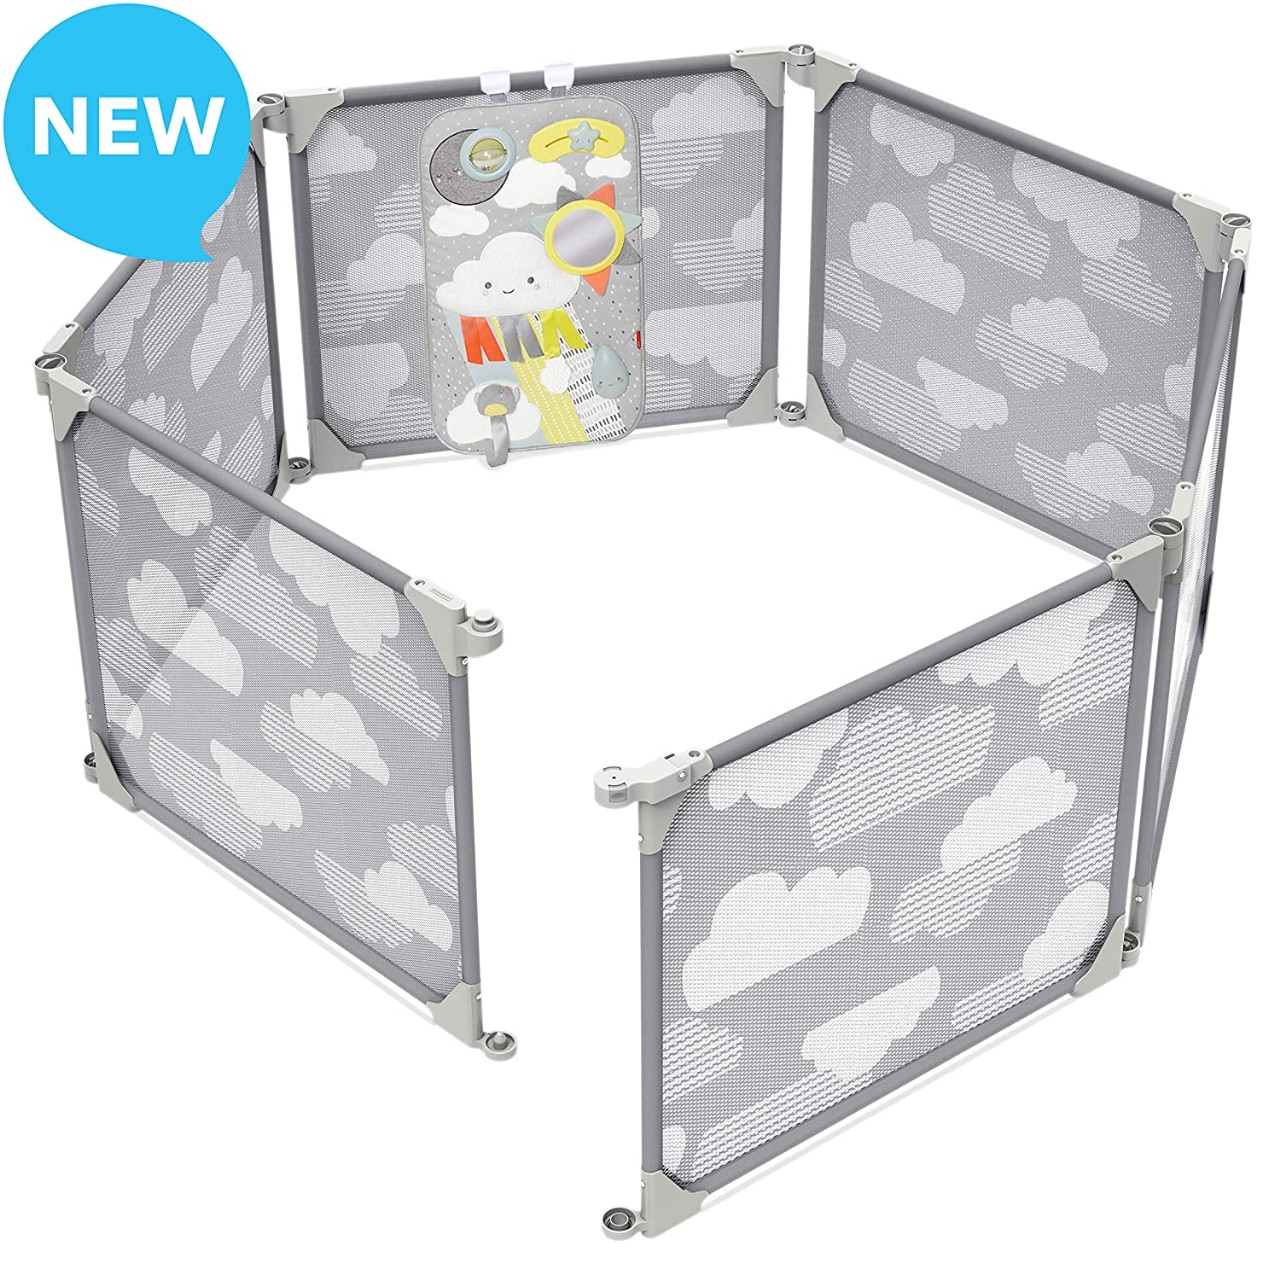 Skip Hop Baby Playpen: Expandable or Wall Mounted Play Yard with Clip-On Play Surface, Silver Lining